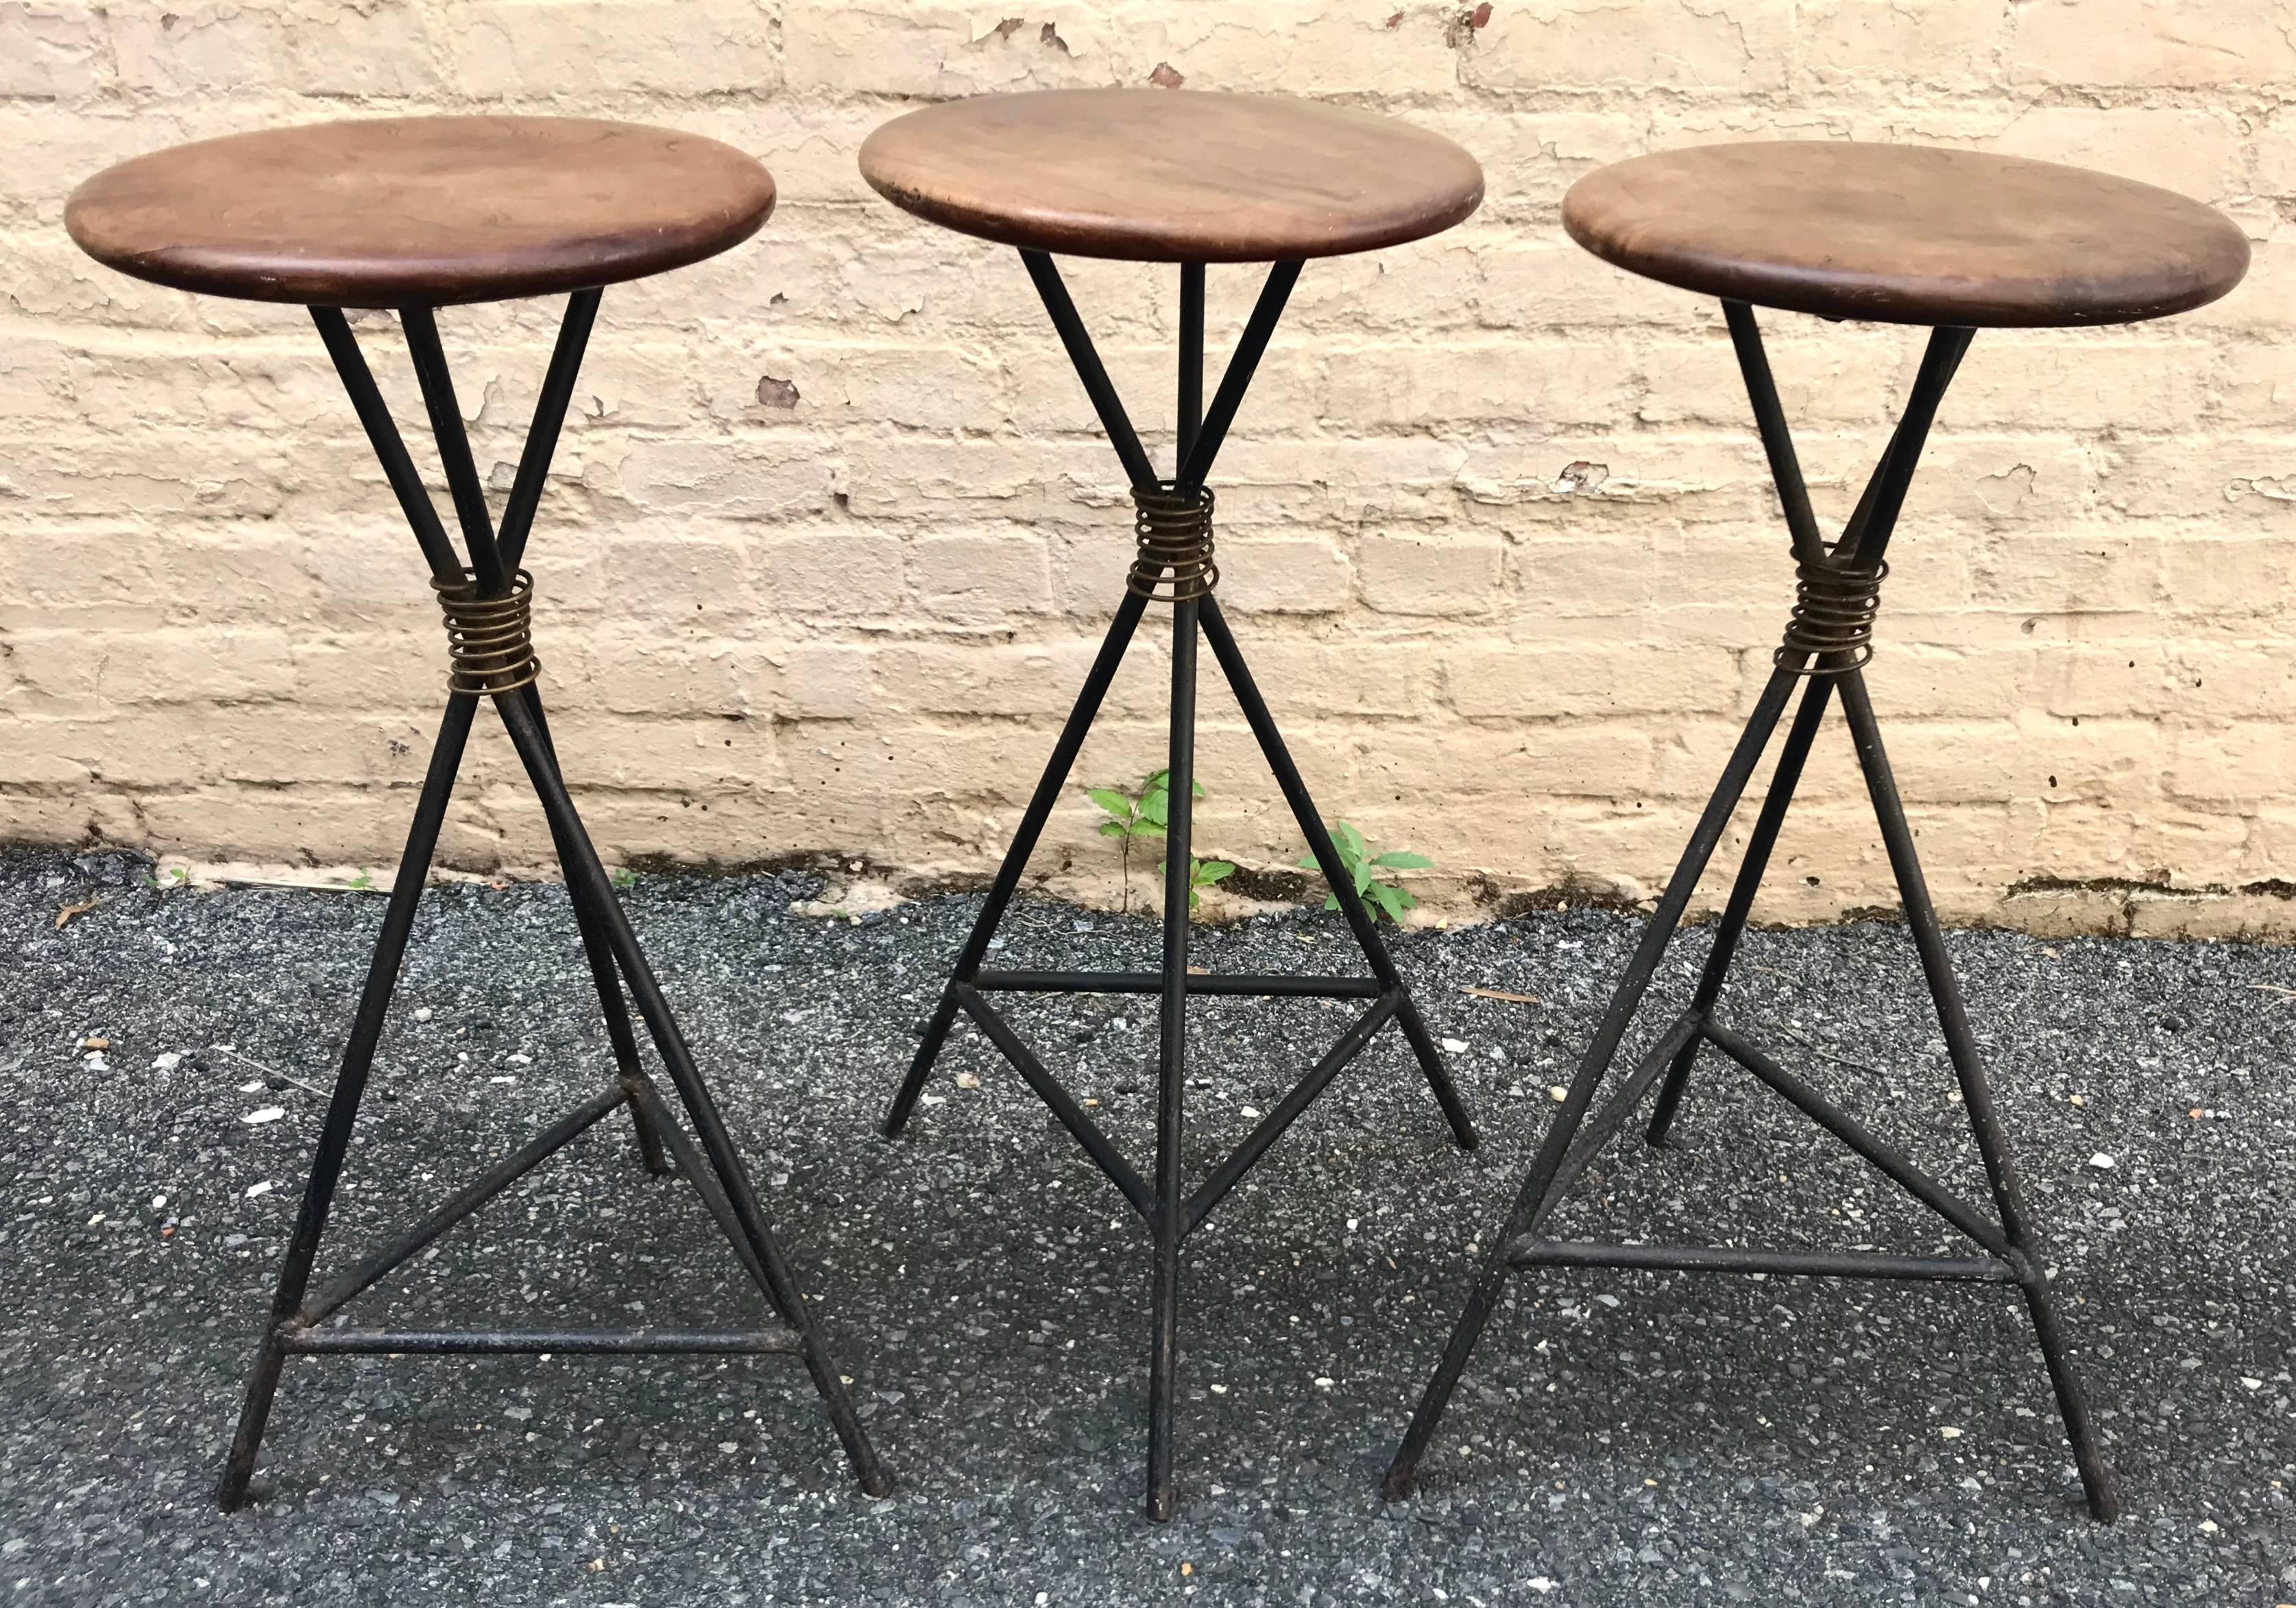 Mid-20th Century Chic Set of Three 1950s French Walnut and Wrought Iron Barstools